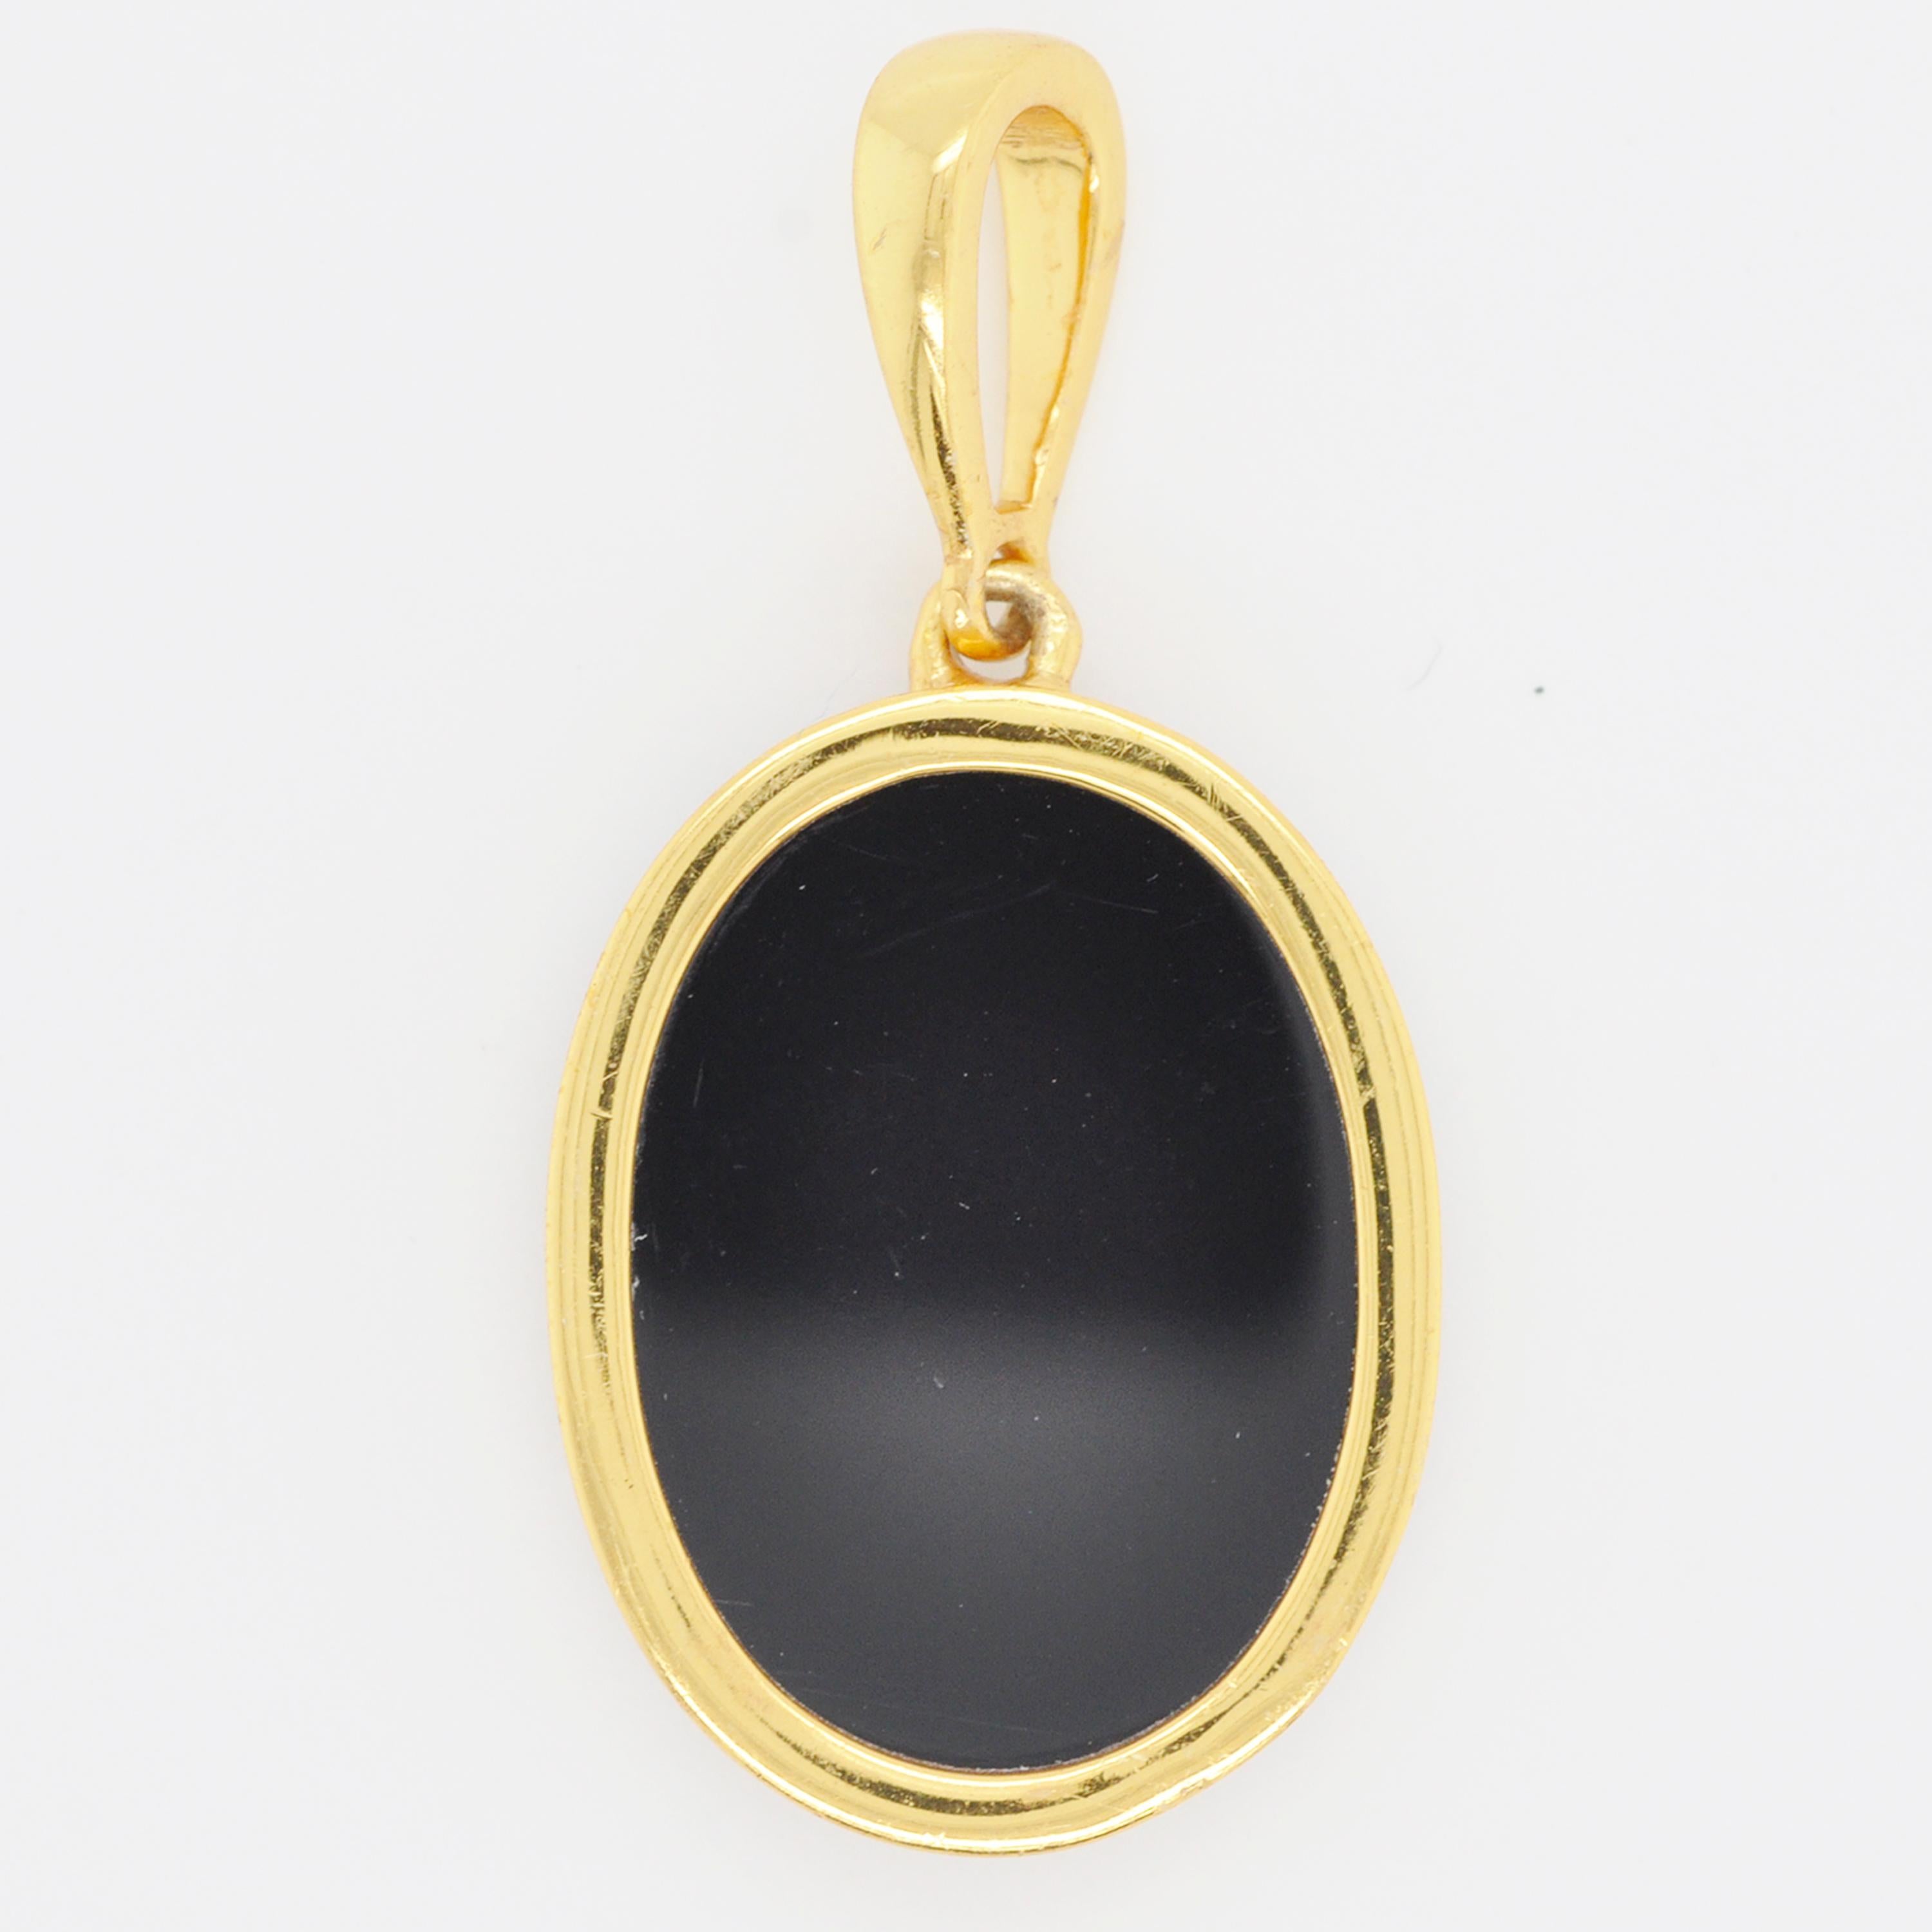 Hand-Carved Leo Zodiac Agate Cameo 925 Sterling Silver Pendant Necklace In New Condition For Sale In Jaipur, Rajasthan